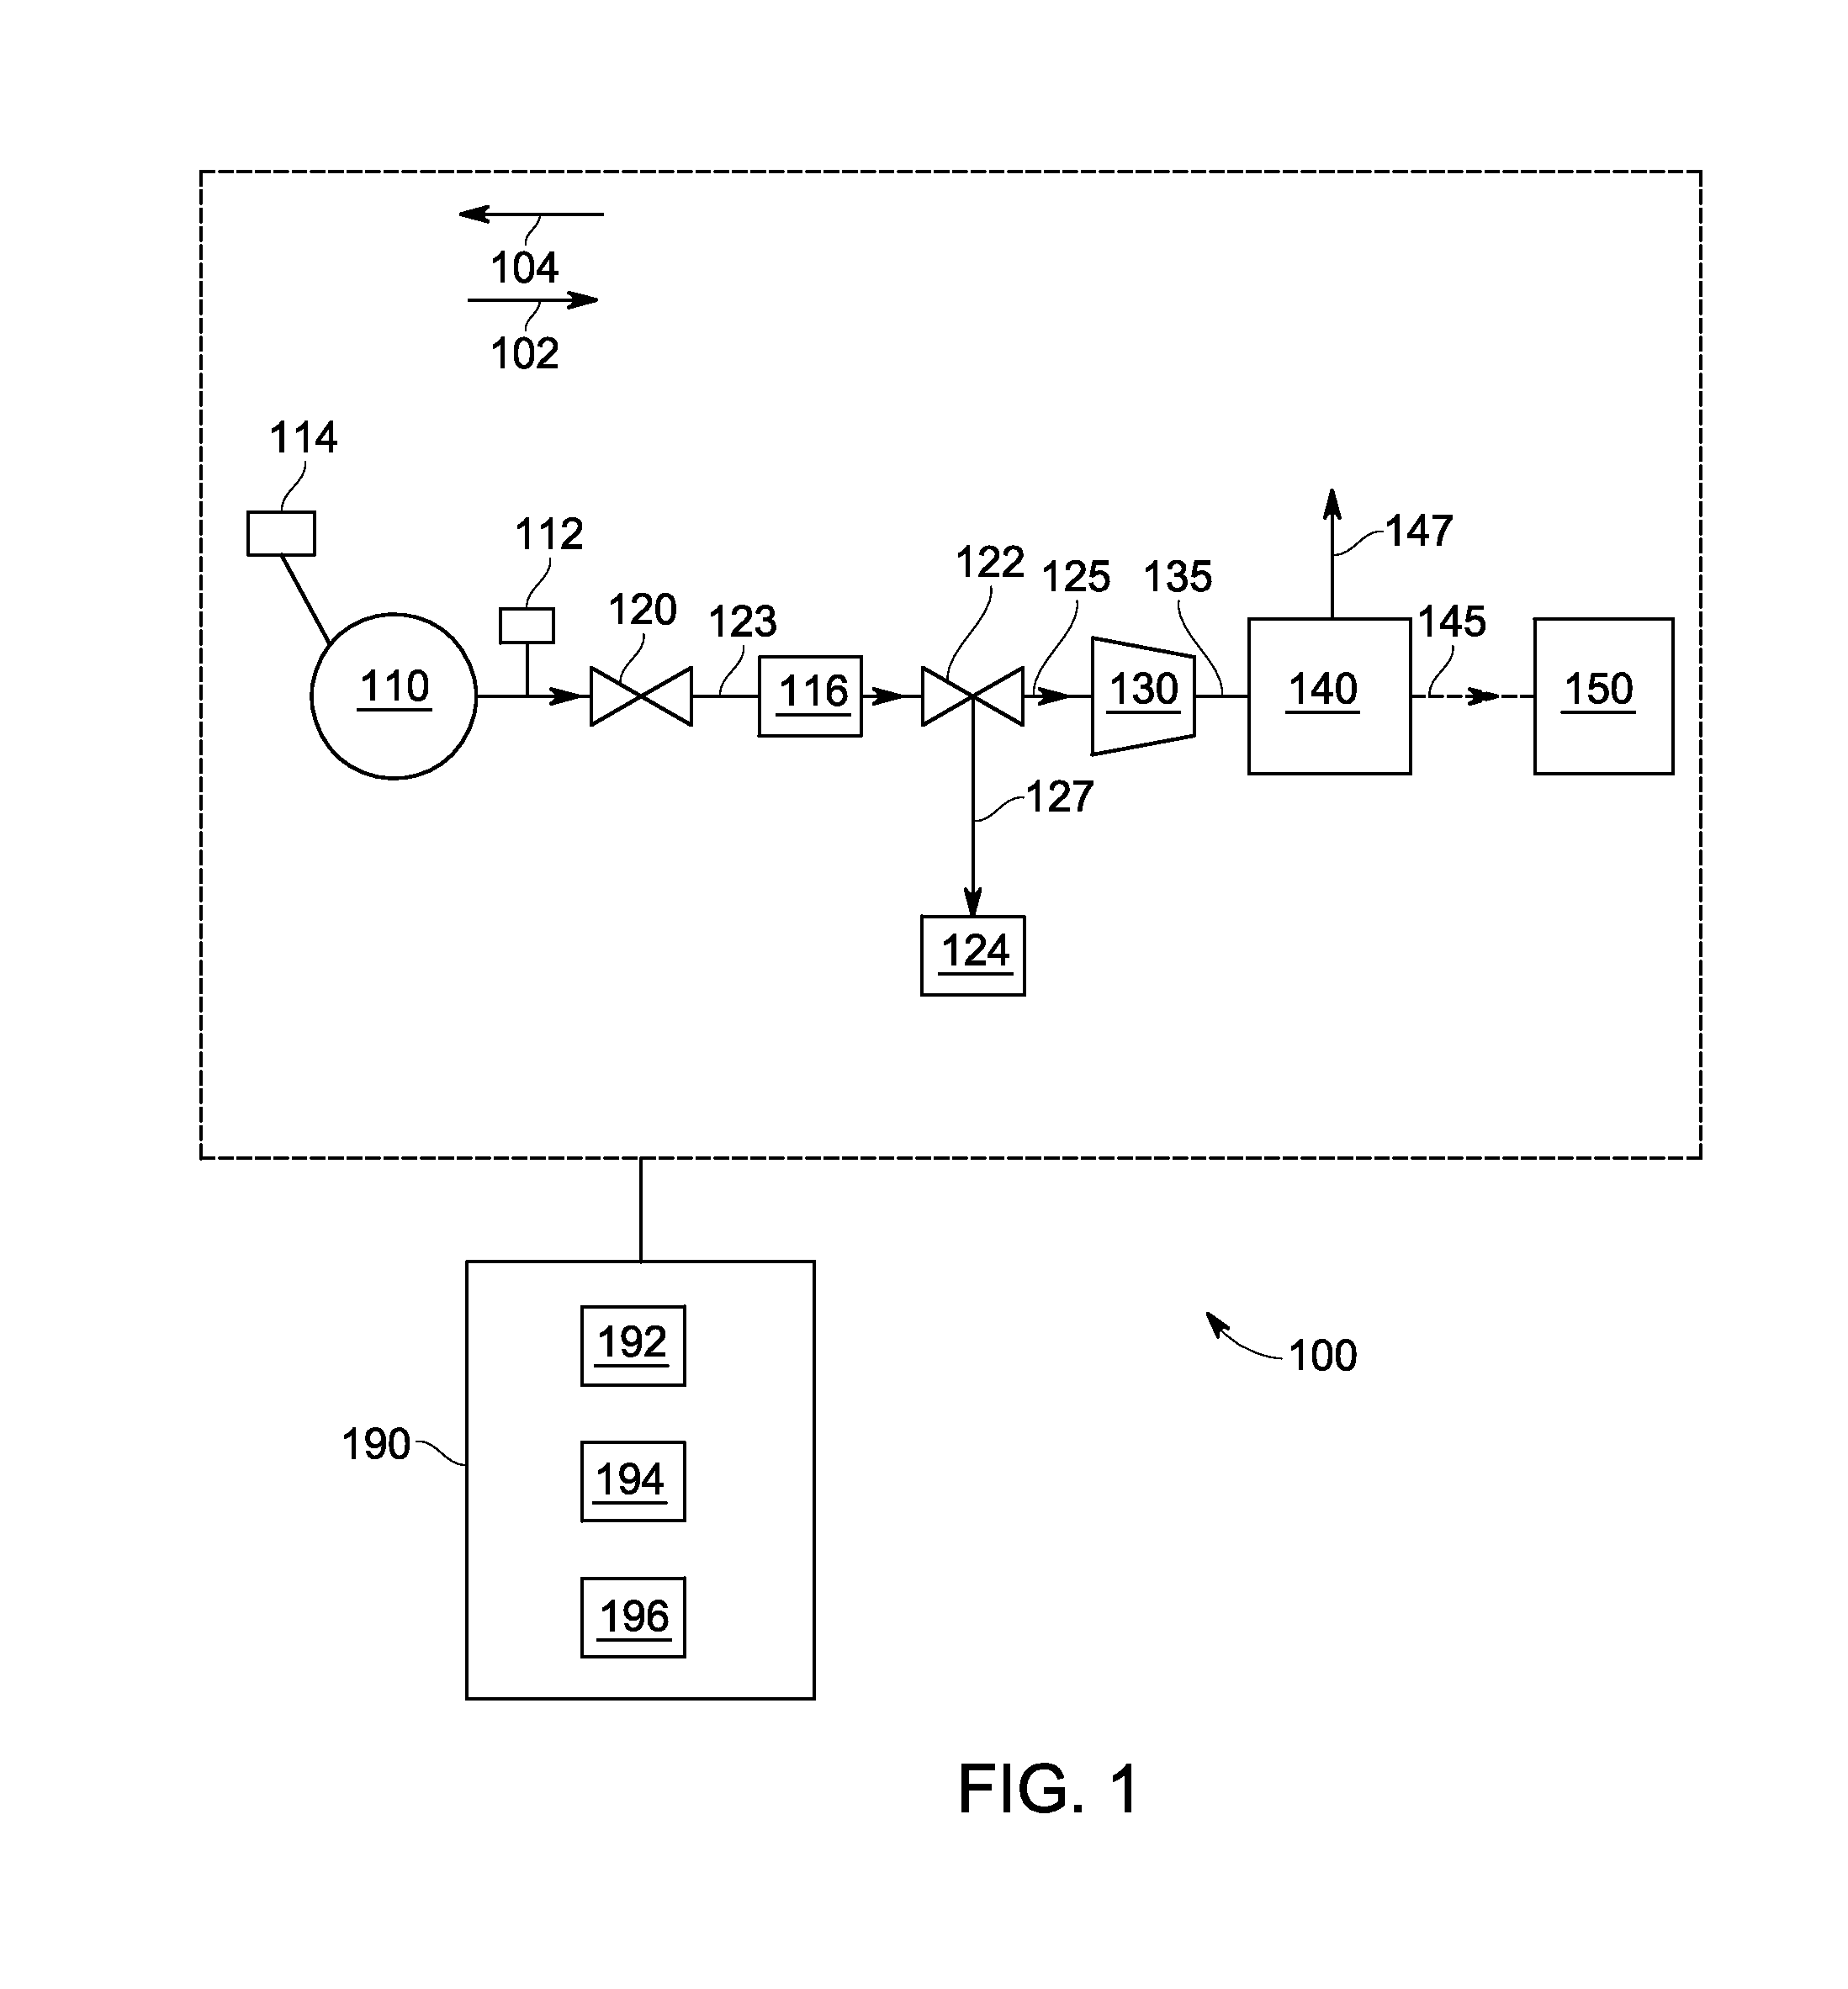 Cryogenic fuel system with auxiliary power provided by boil-off gas